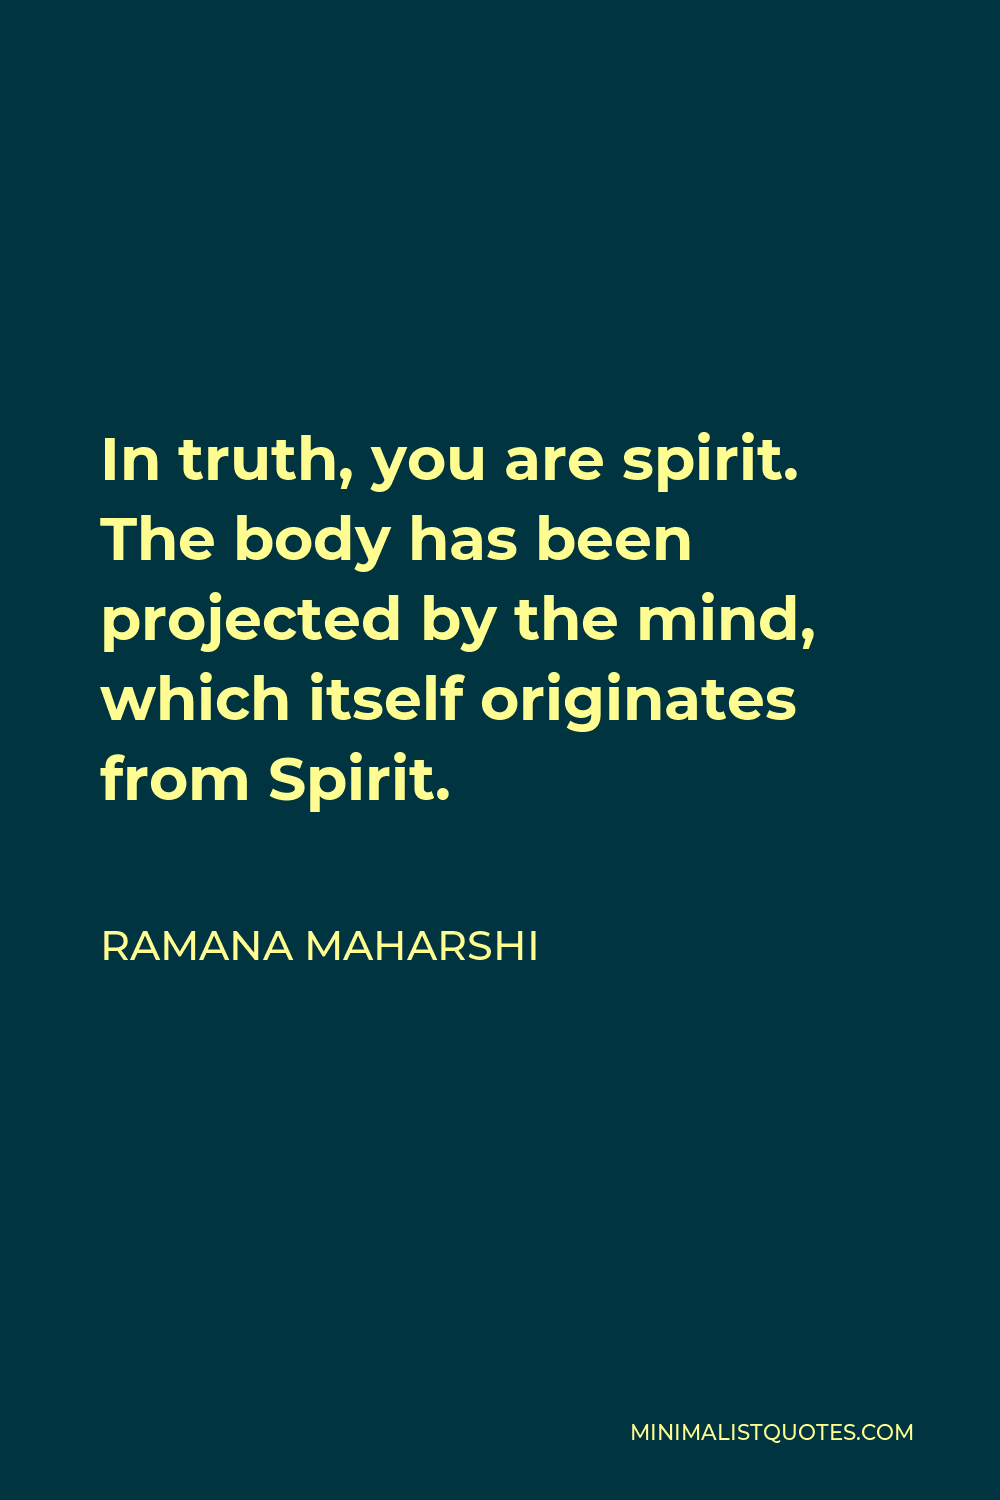 Ramana Maharshi Quote - In truth, you are spirit. The body has been projected by the mind, which itself originates from Spirit.